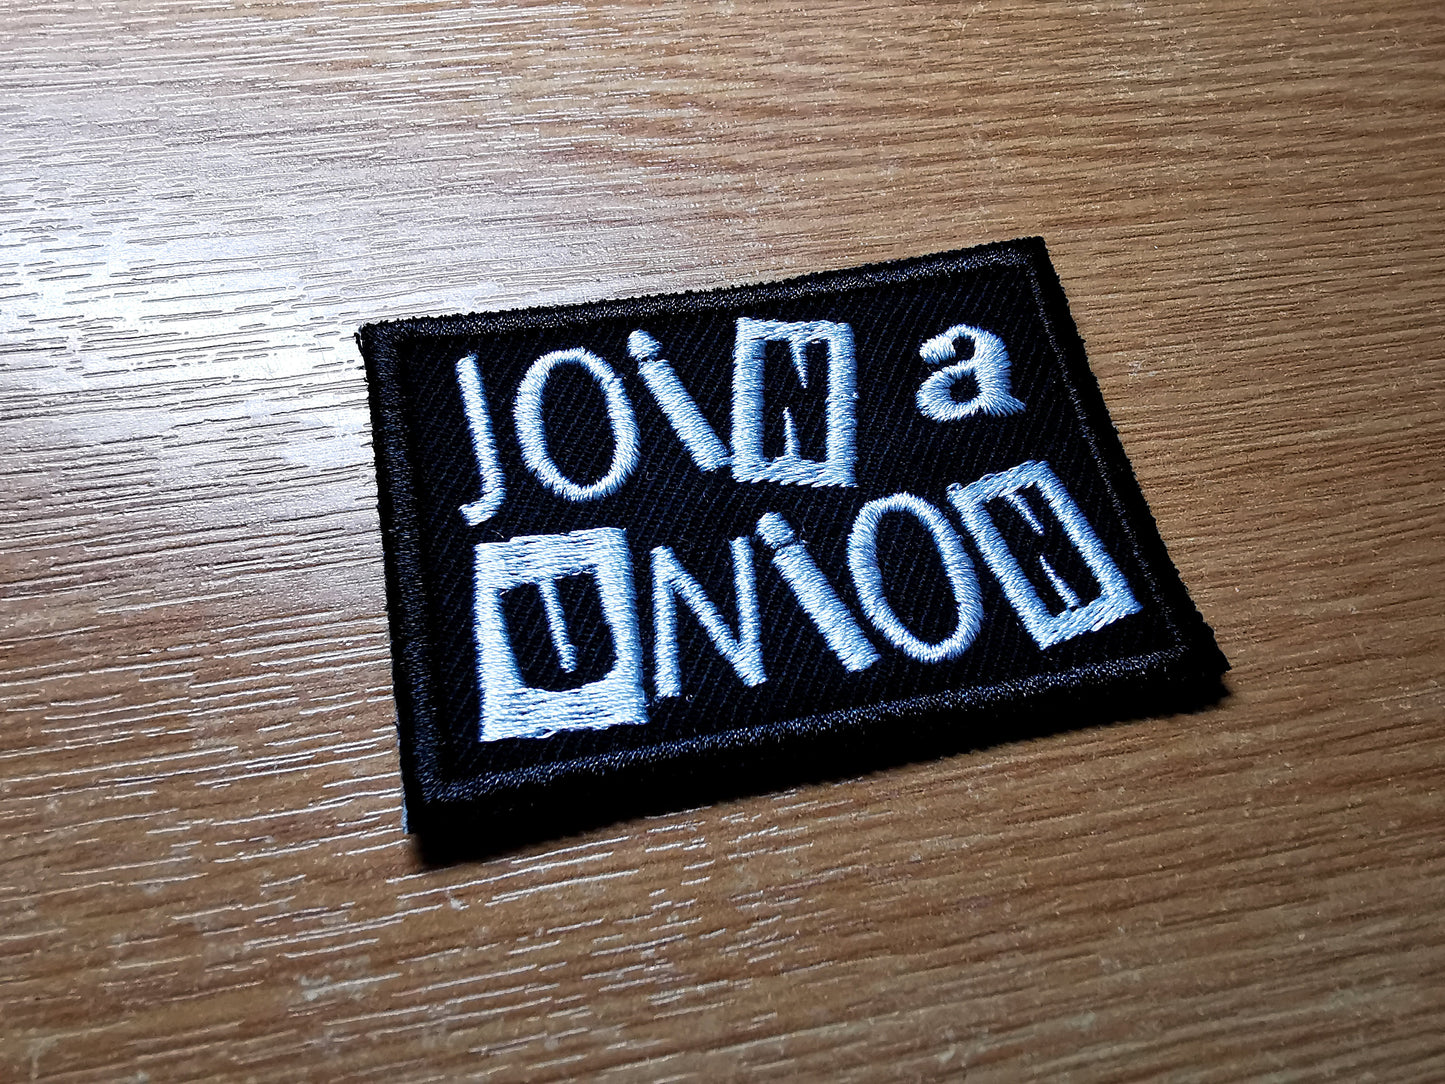 Join a Union Punk Embroidered Iron On Patch Politics Workers Labour Great Resignation